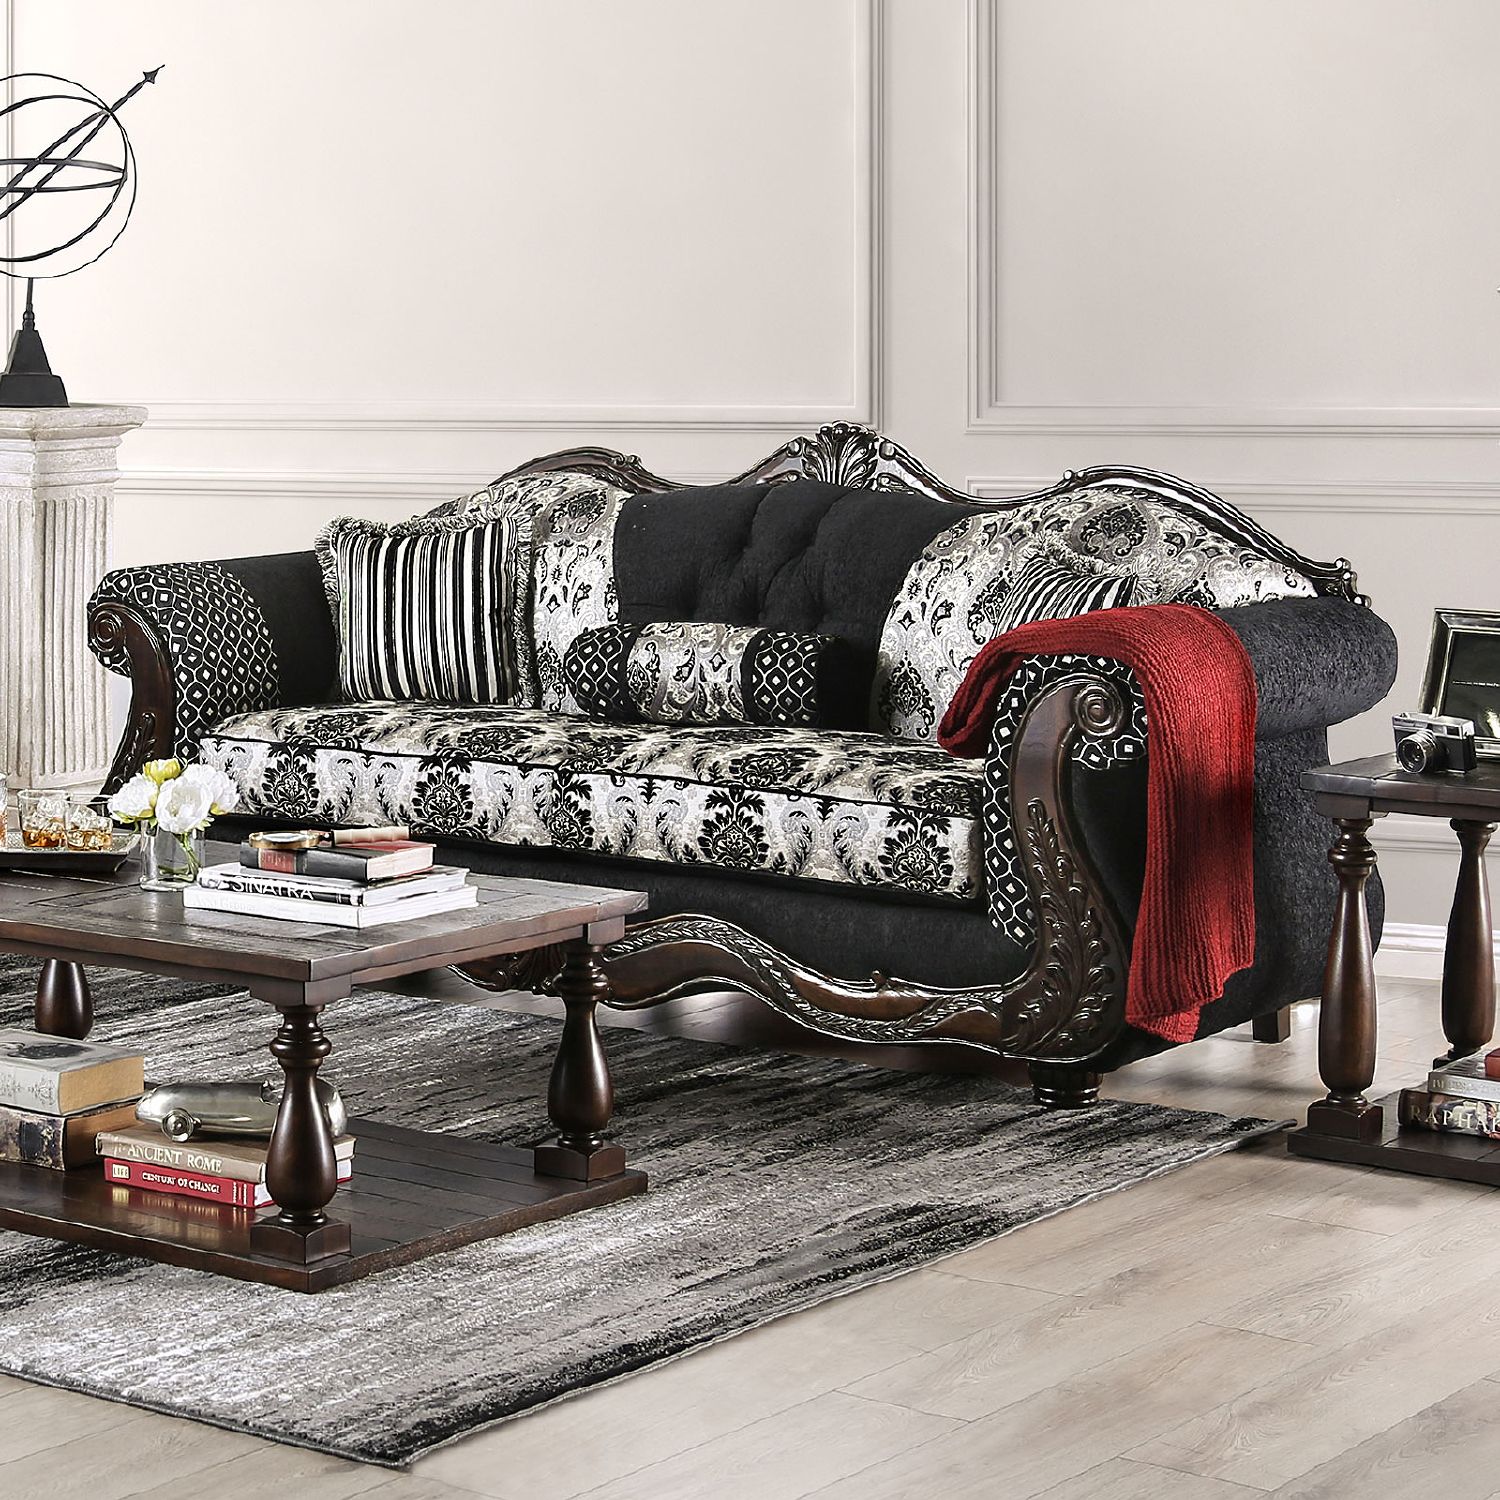 Furniture Of America Ronja Black Sofa Sm6432 Sf | Comfyco In Traditional Black Fabric Sofas (View 9 of 15)